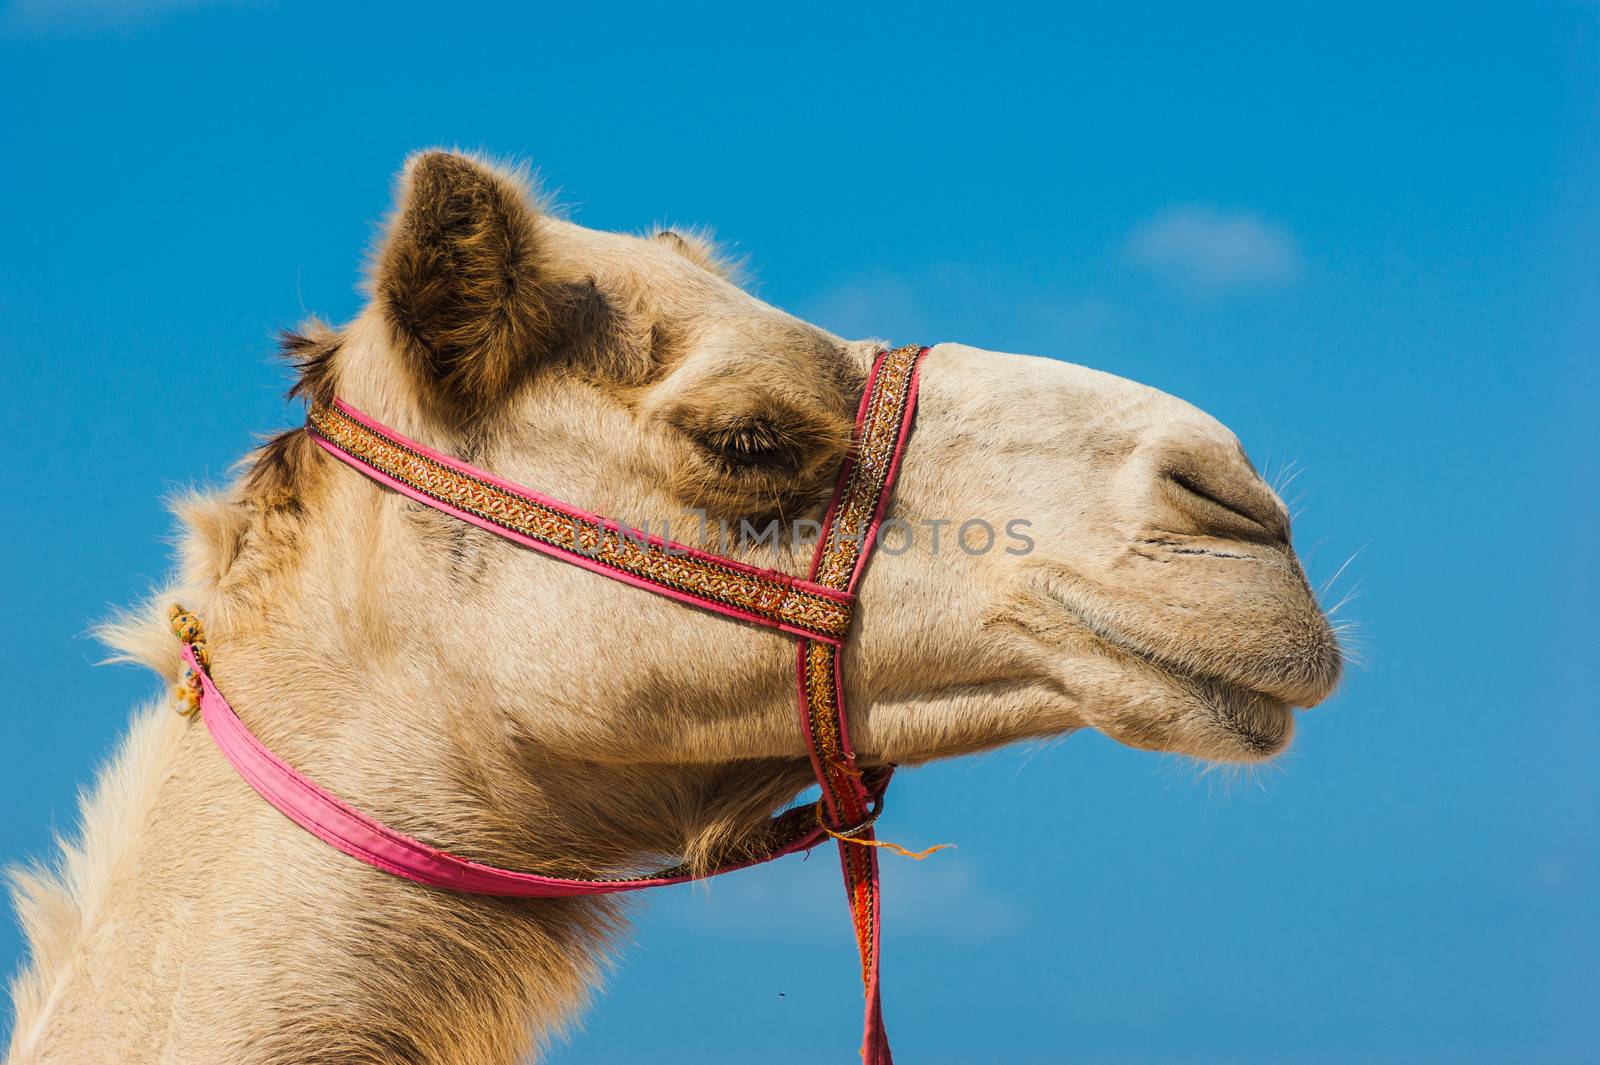 The muzzle of the African camel by oleg_zhukov